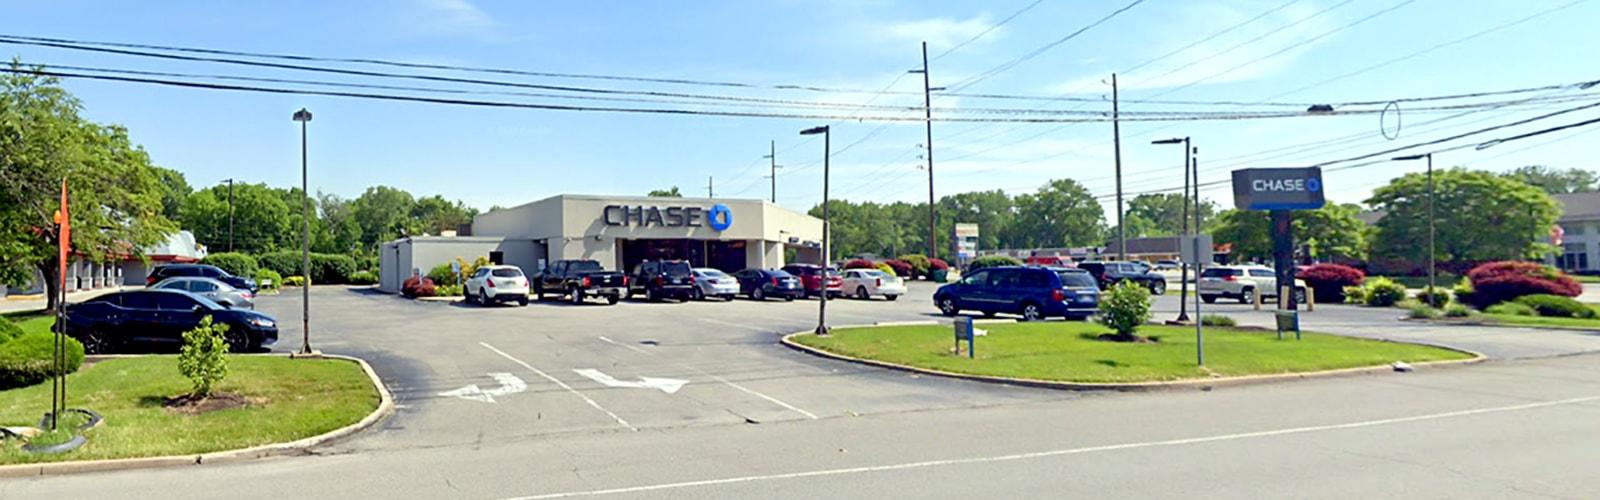 2-Specific Property Page - 6210 Allisonville Rd - Chase Building